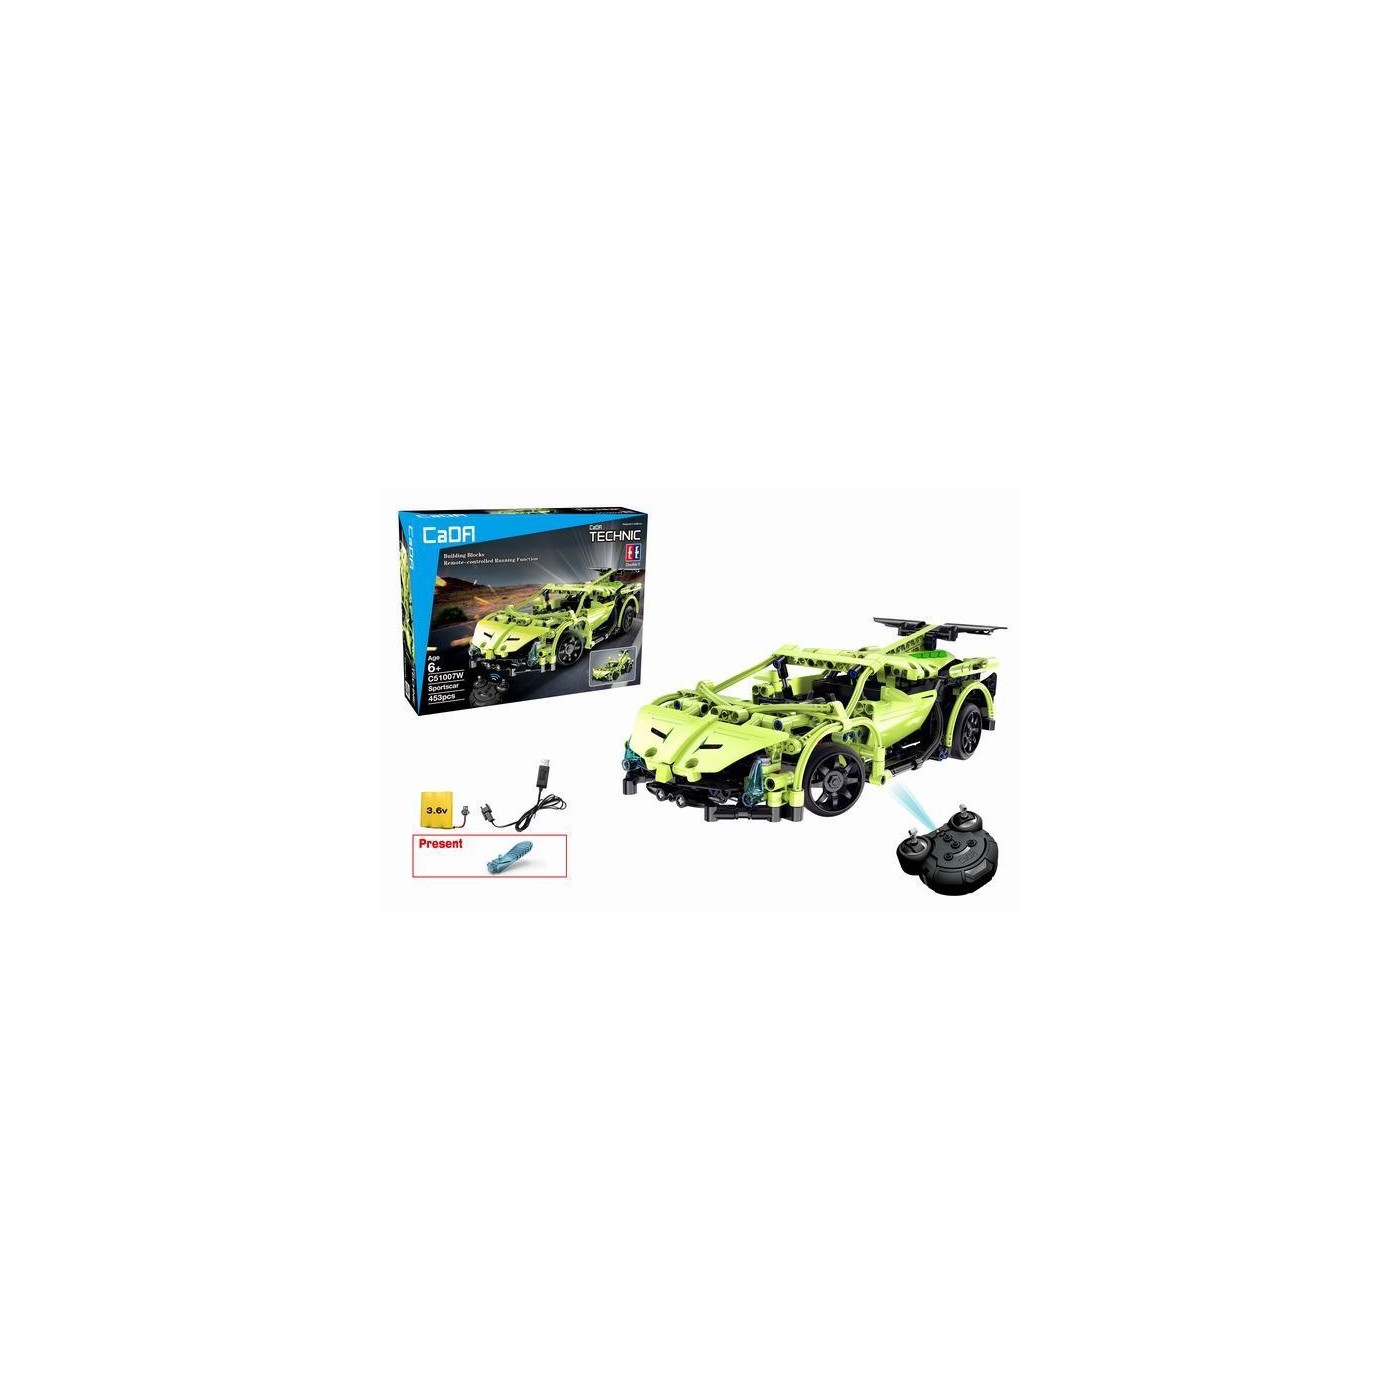 The pads R/C Car Sports 453 EE